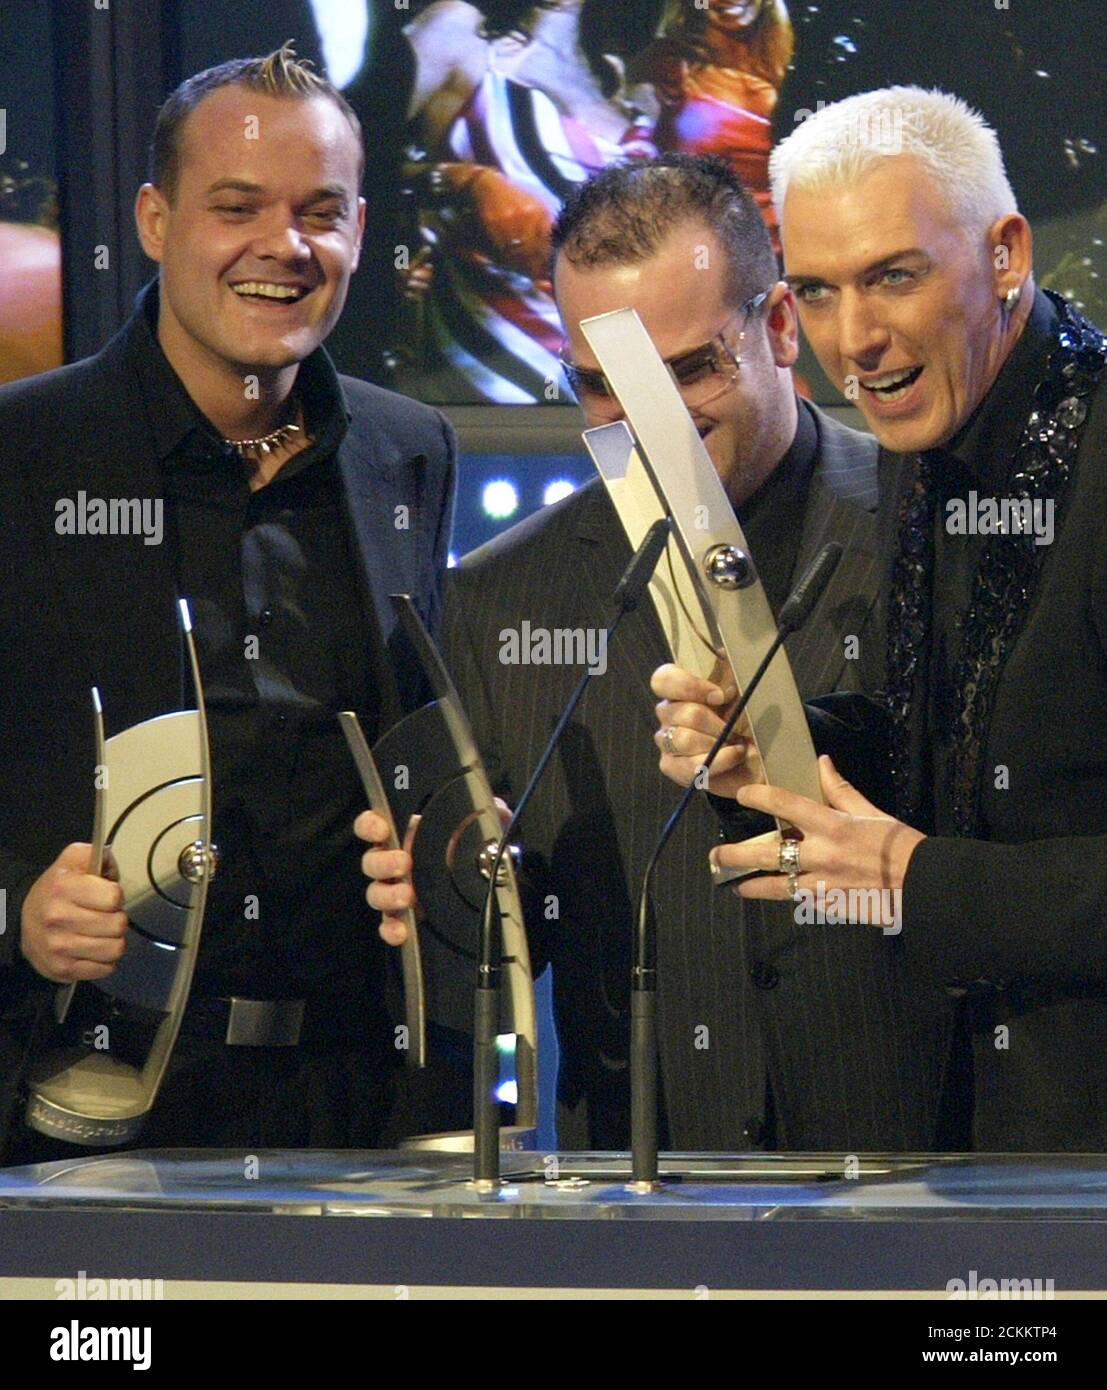 GERMAN SINGERS RICK J. JORDAN, AXEL COON AND H.P. BAXXTER OF 'SCOOTER' ACCEPT THE MUSIC AWARDS IN BERLIN. singers Rick Jordan (L-R), Axel Coon and H.P. Baxxter of